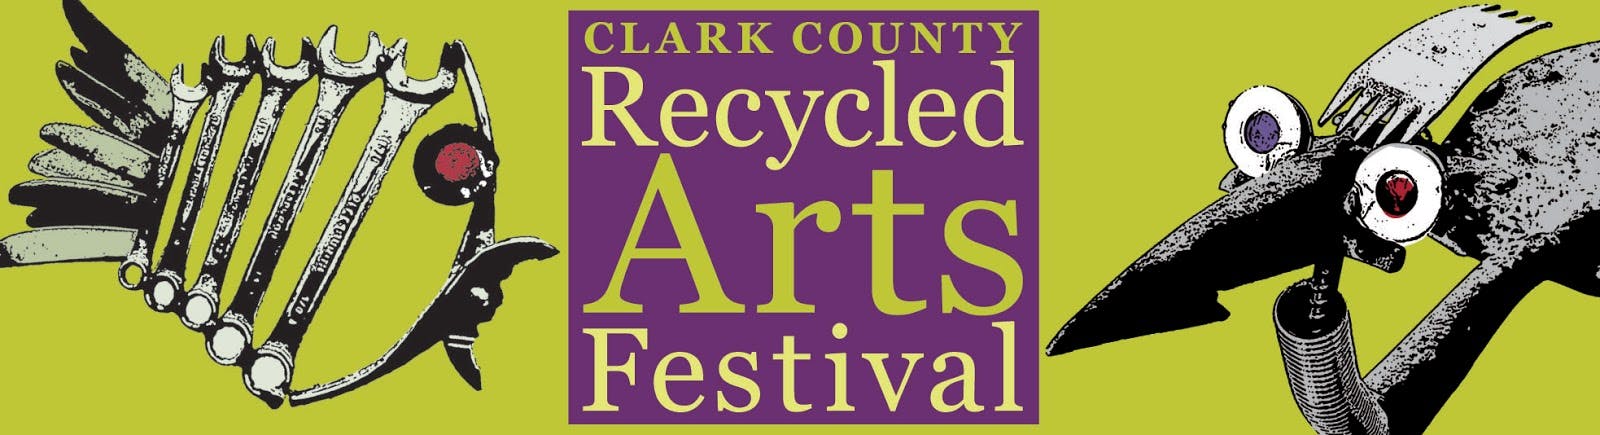 Image - Clark County Recycled Arts Festival